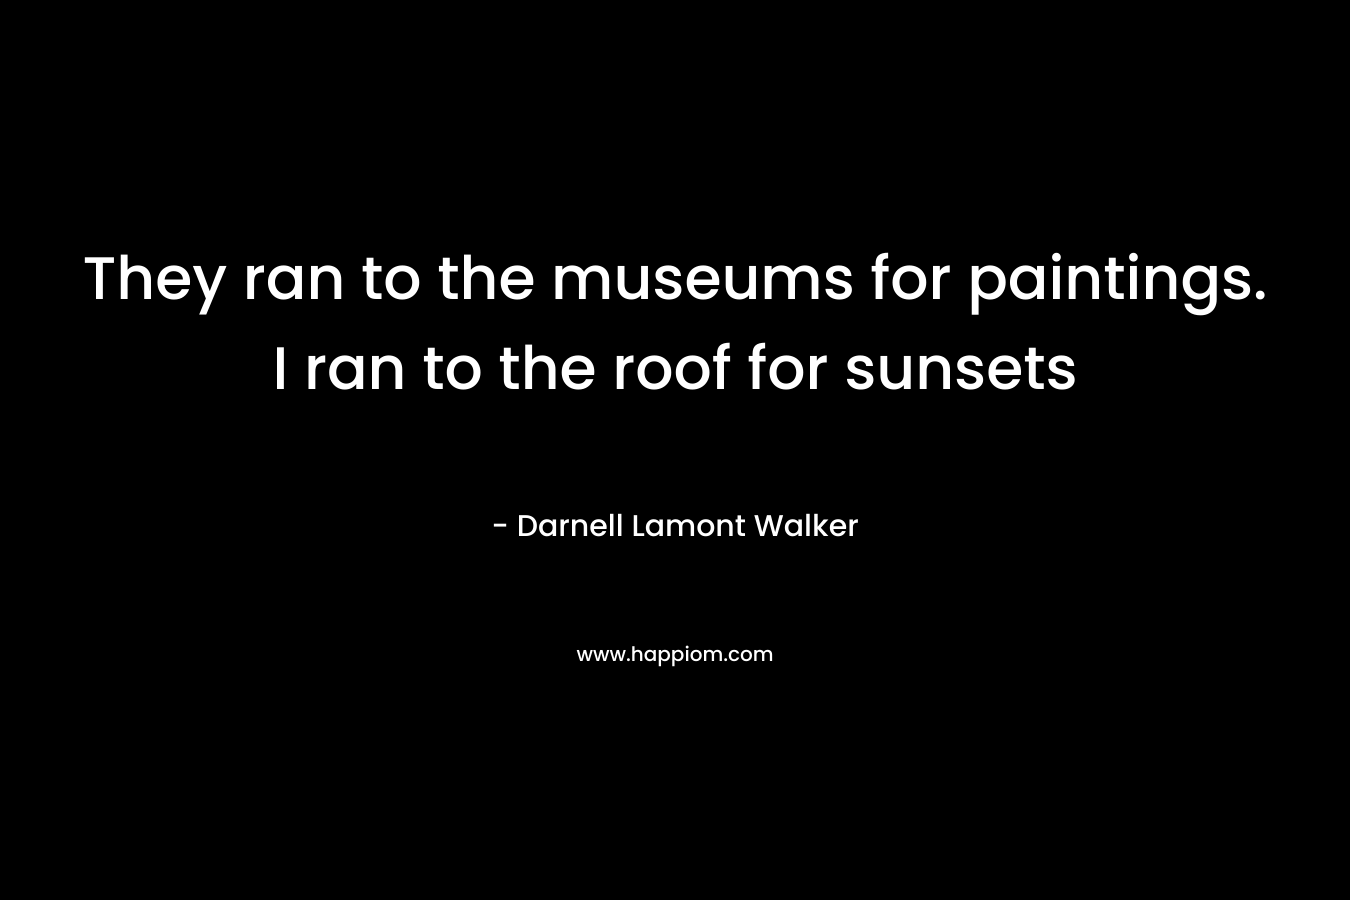 They ran to the museums for paintings. I ran to the roof for sunsets